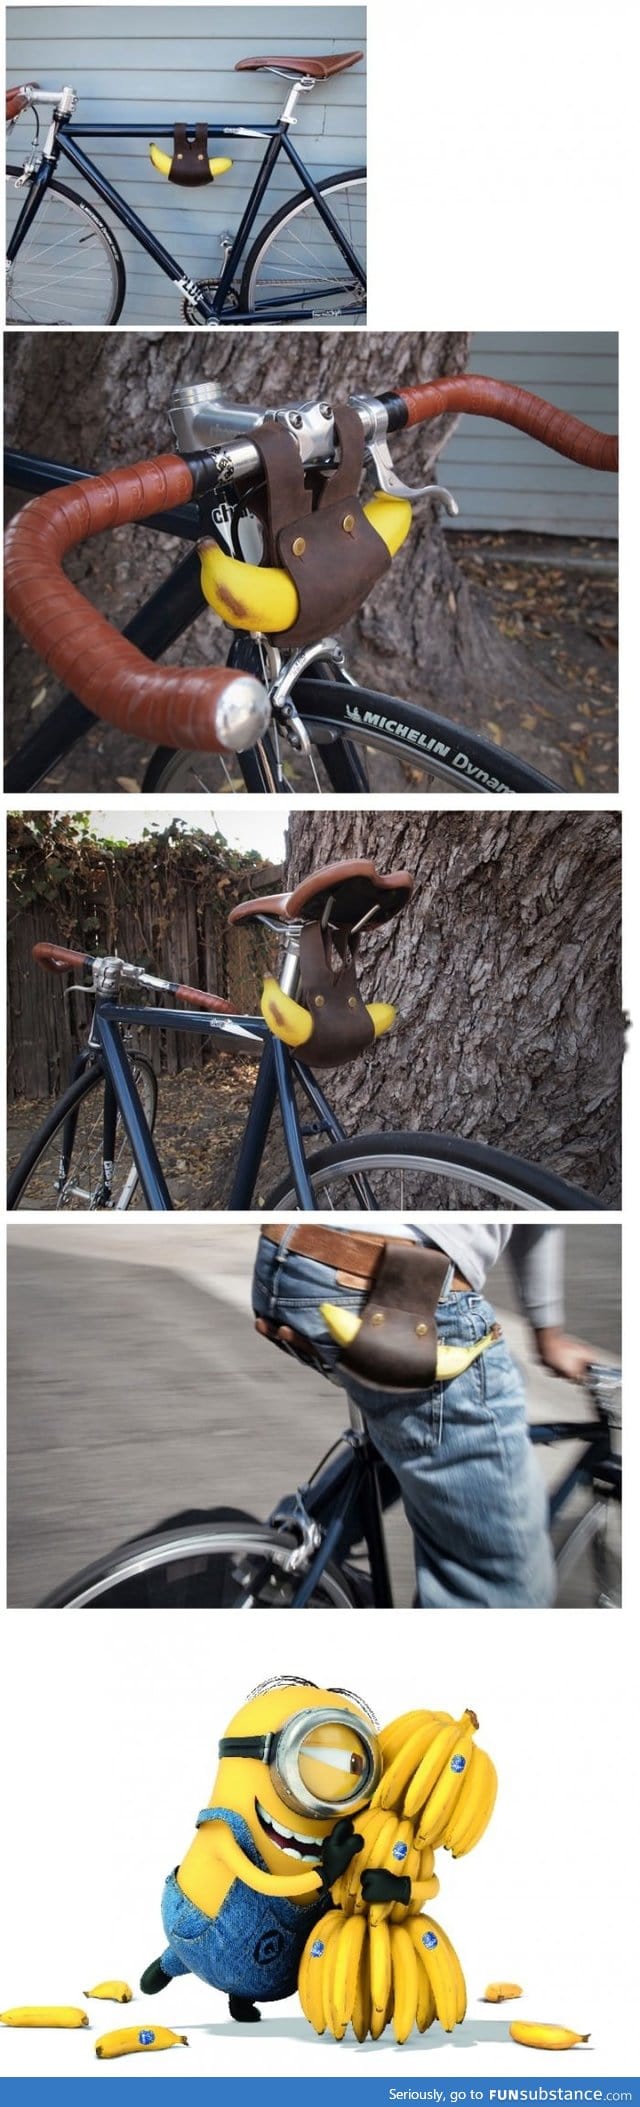 Banana holder for your bicycle ($55)